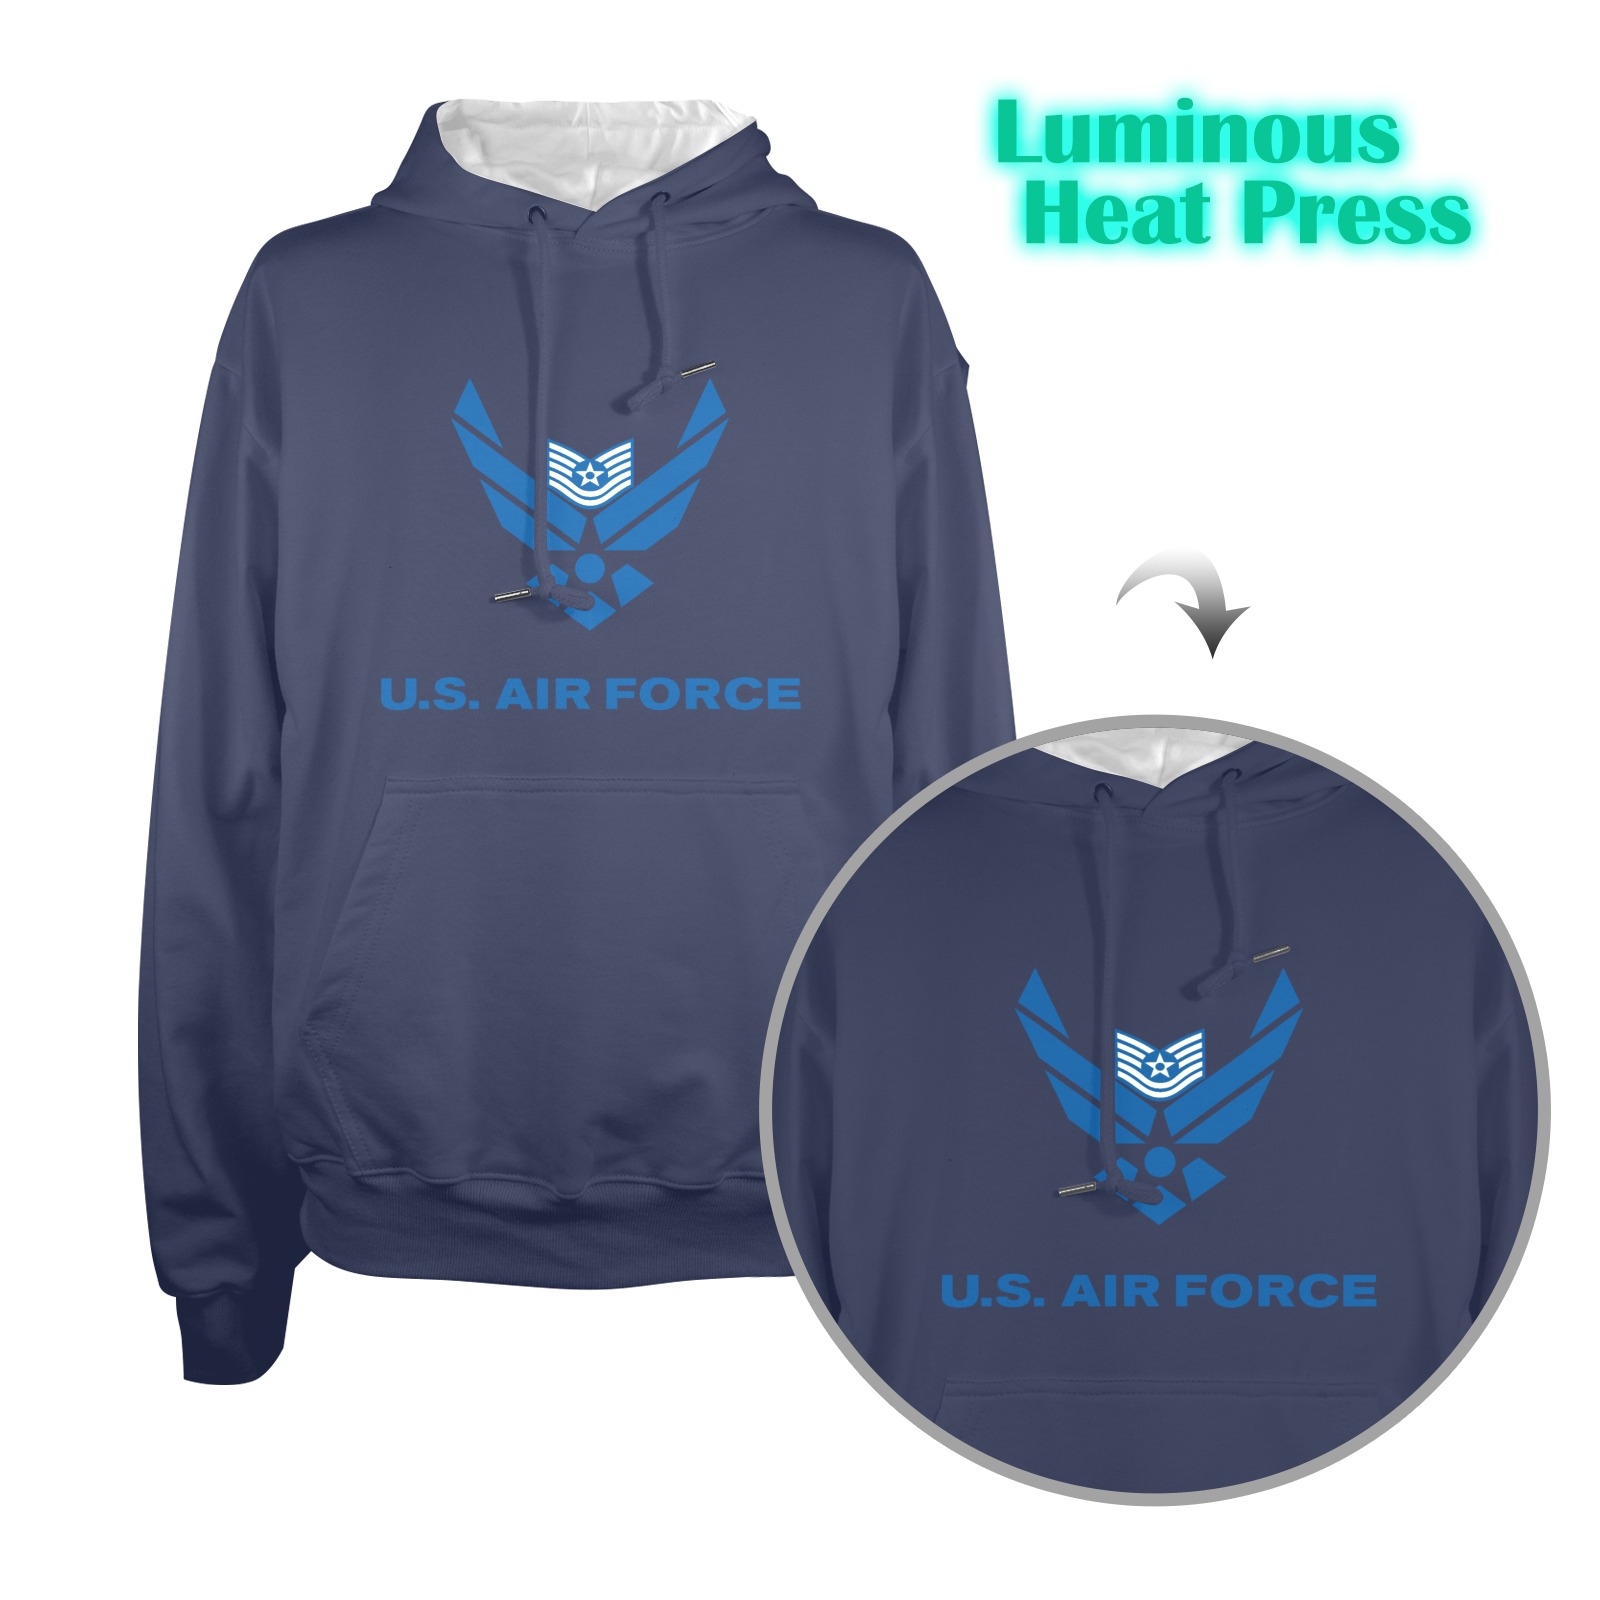 Technical Sergeant Offutt Air Force Base Men's Glow in the Dark Hoodie (Two Sides Printing)